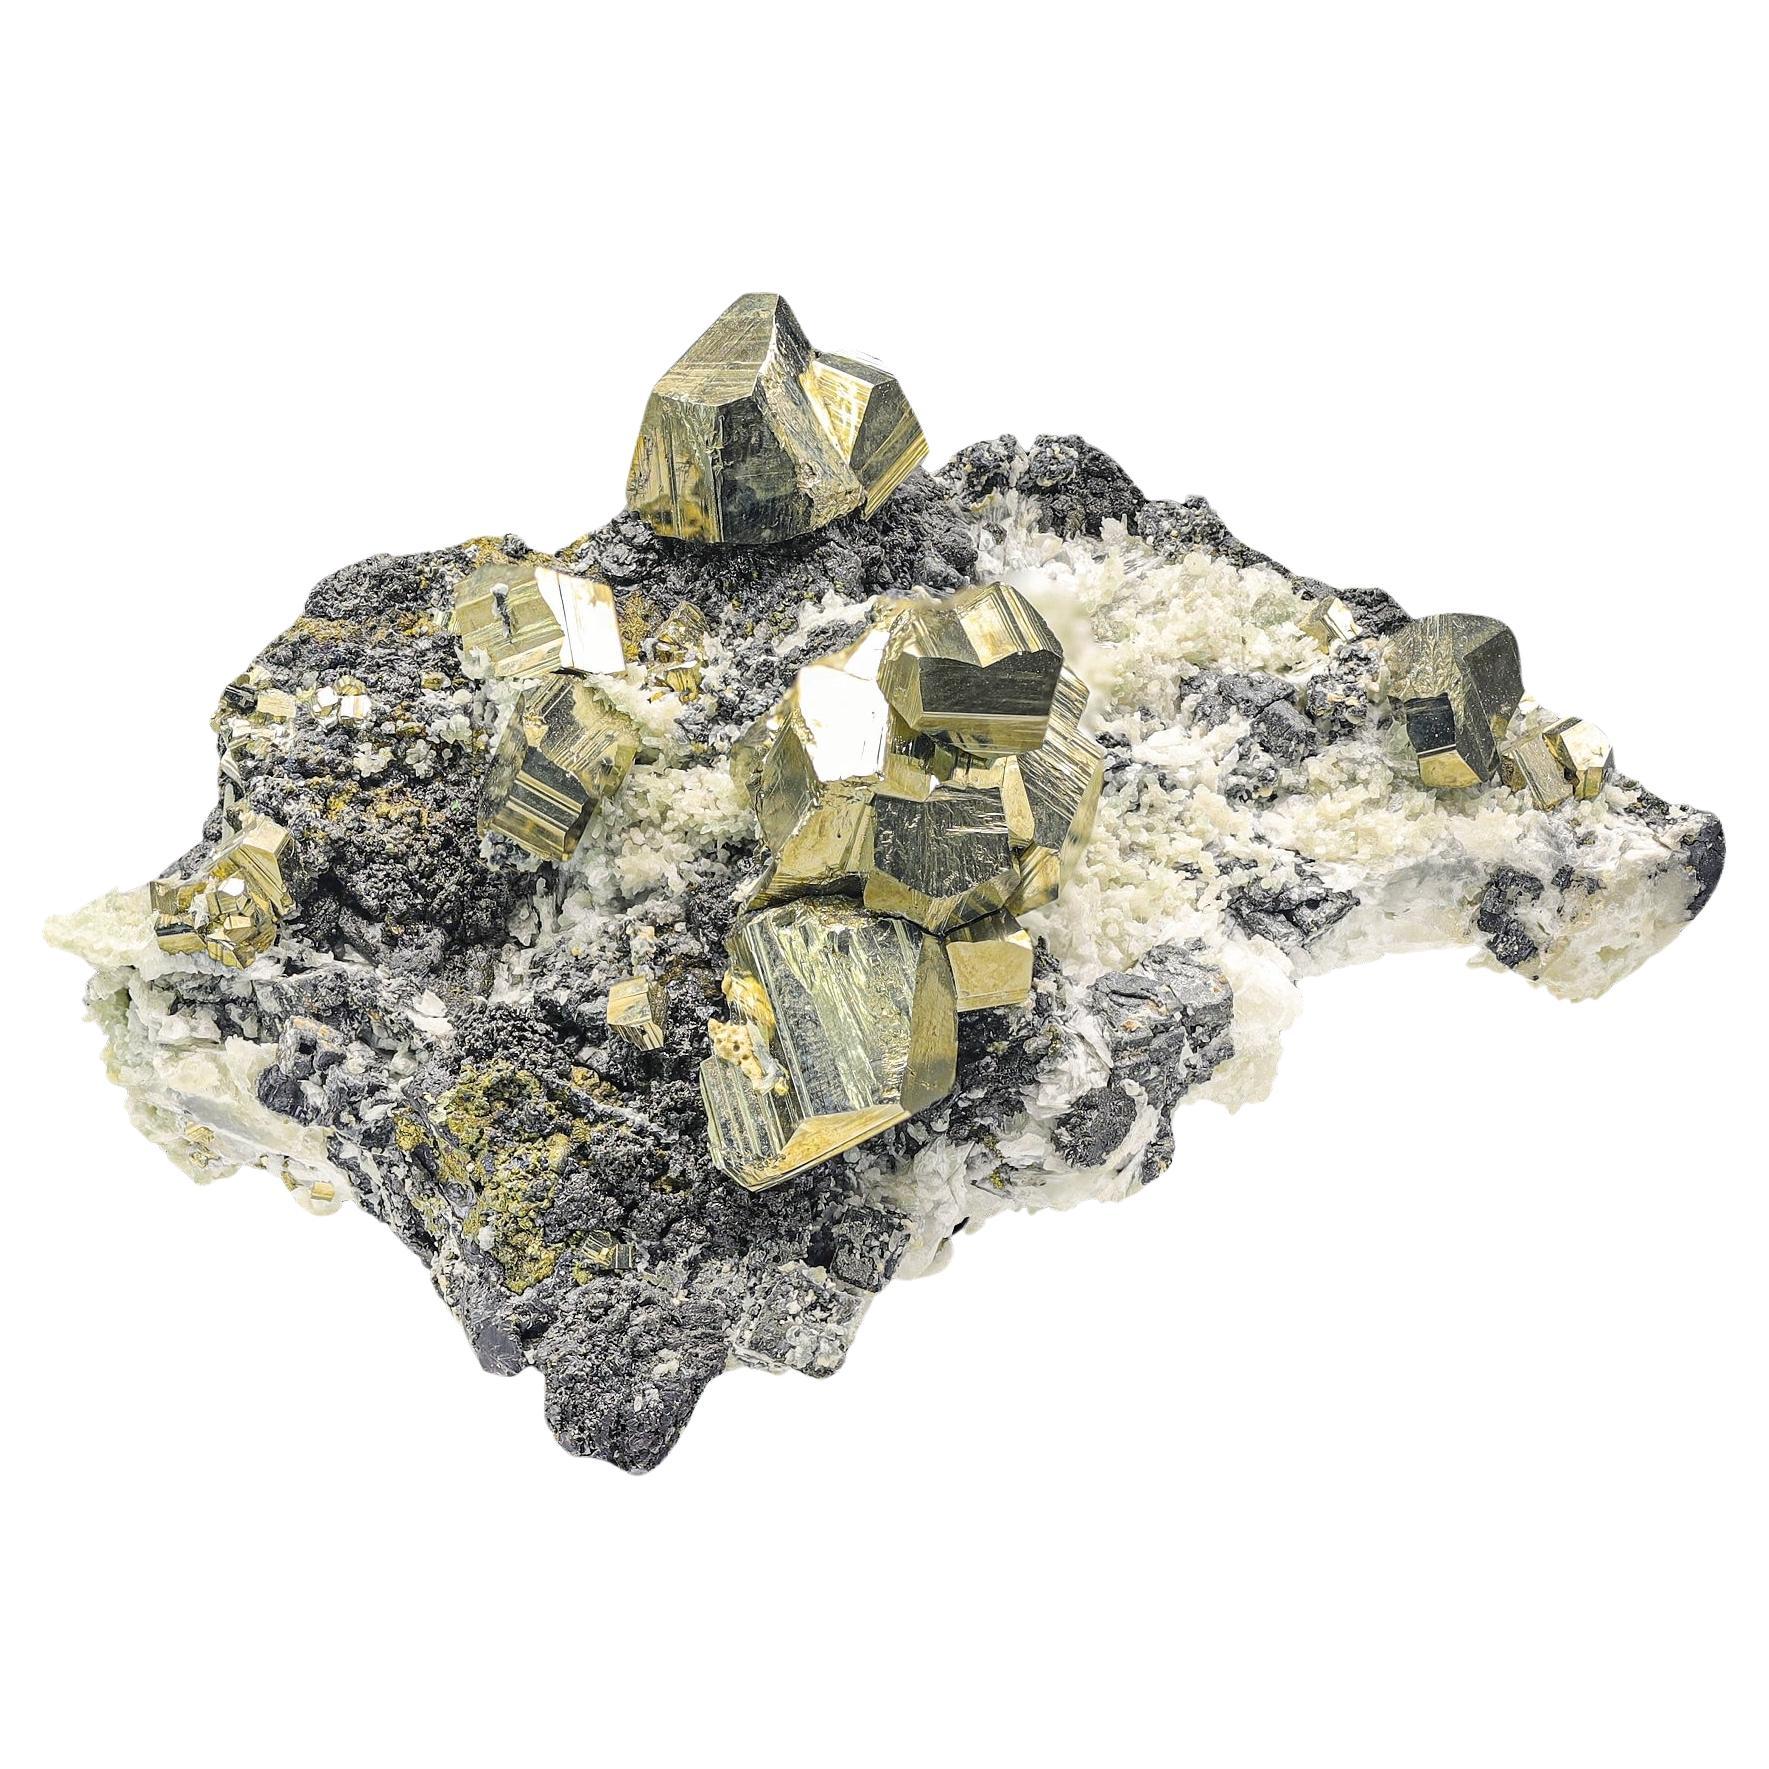 Glamming Golden Color Intergrown Pyrite Crystals On Matrix From Pakistan For Sale